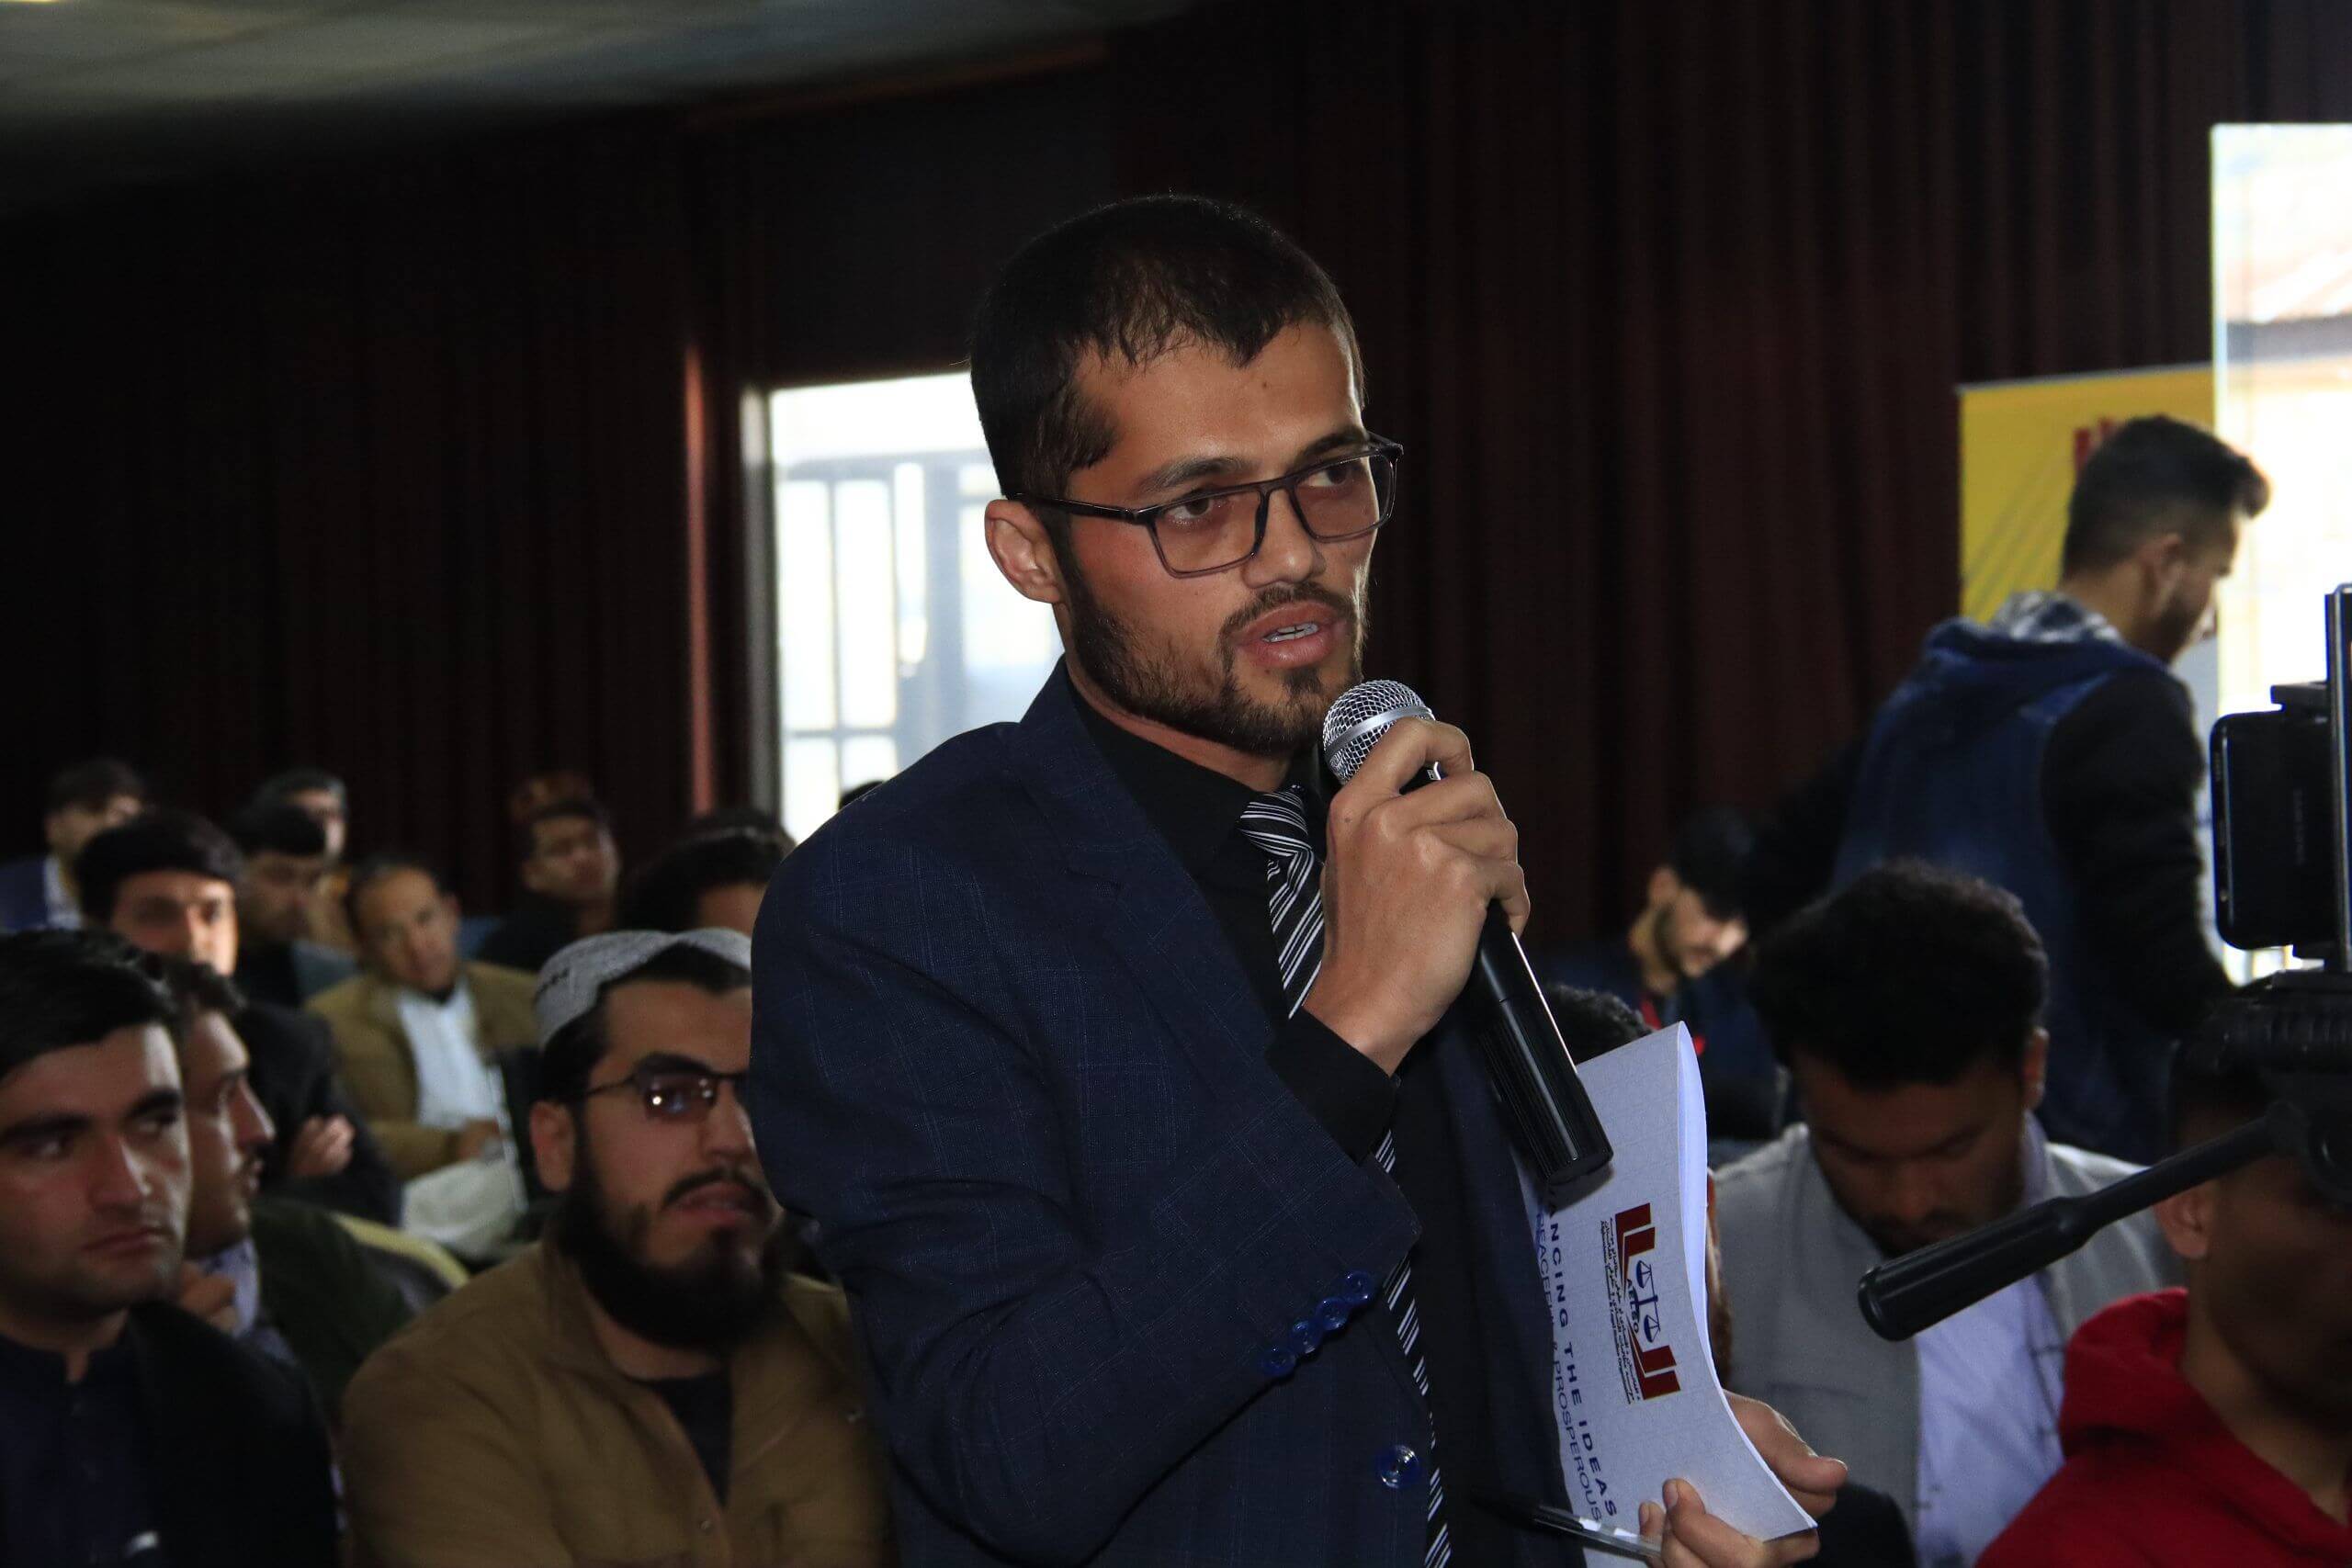 Hazharul Haq Shamsi one of the participants from Parwan Province